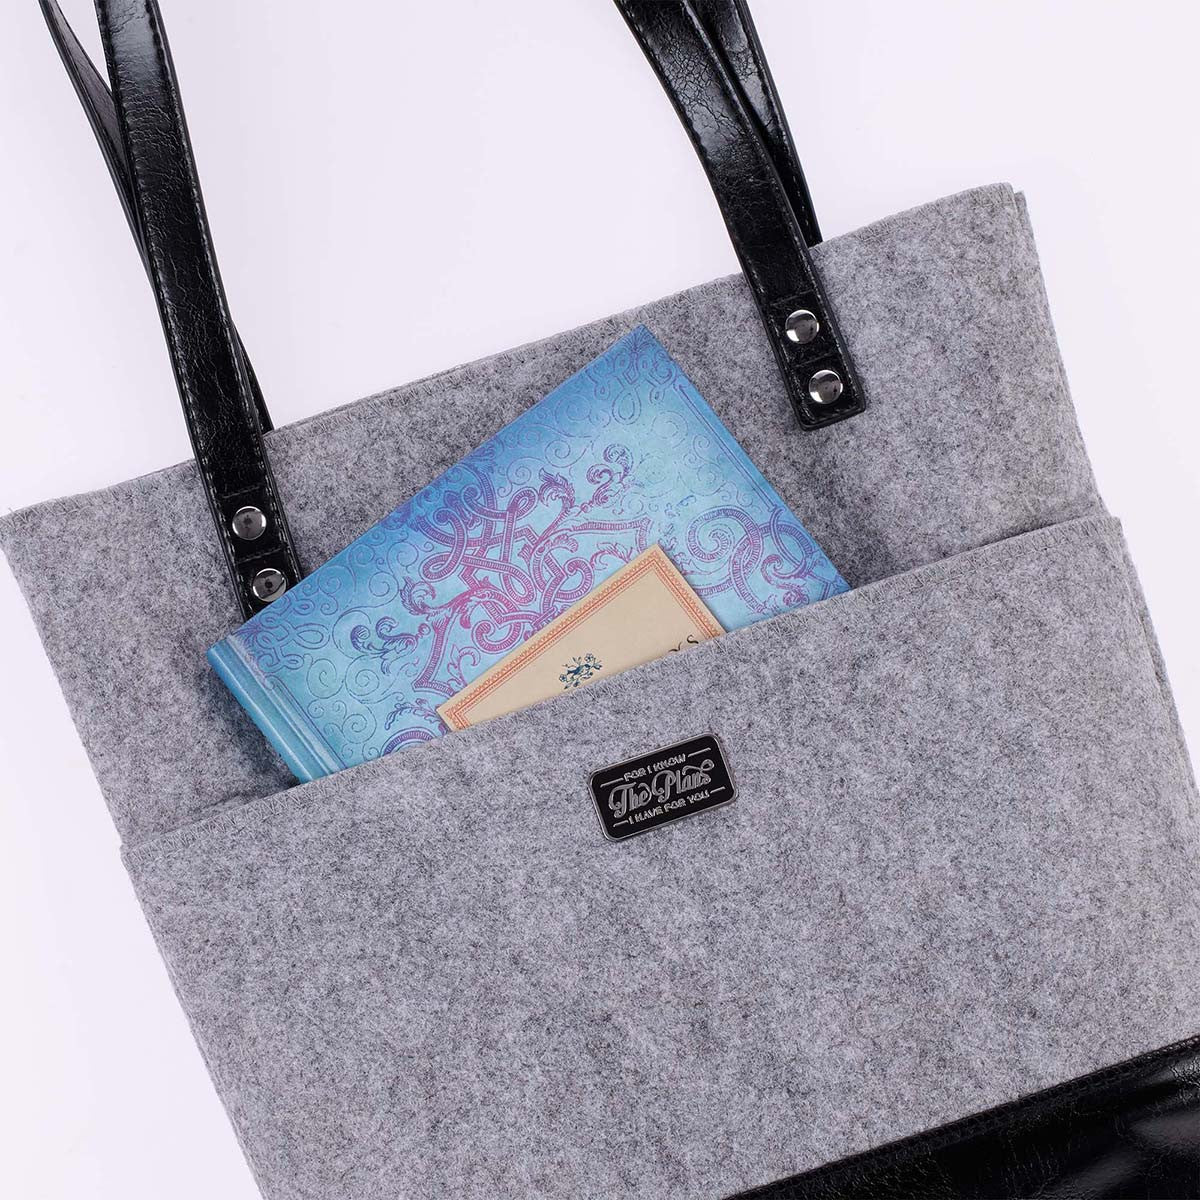 The Plans Heather Gray Felt and Black Faux Leather Fashion Bible Tote Bag - Jeremiah 29:11